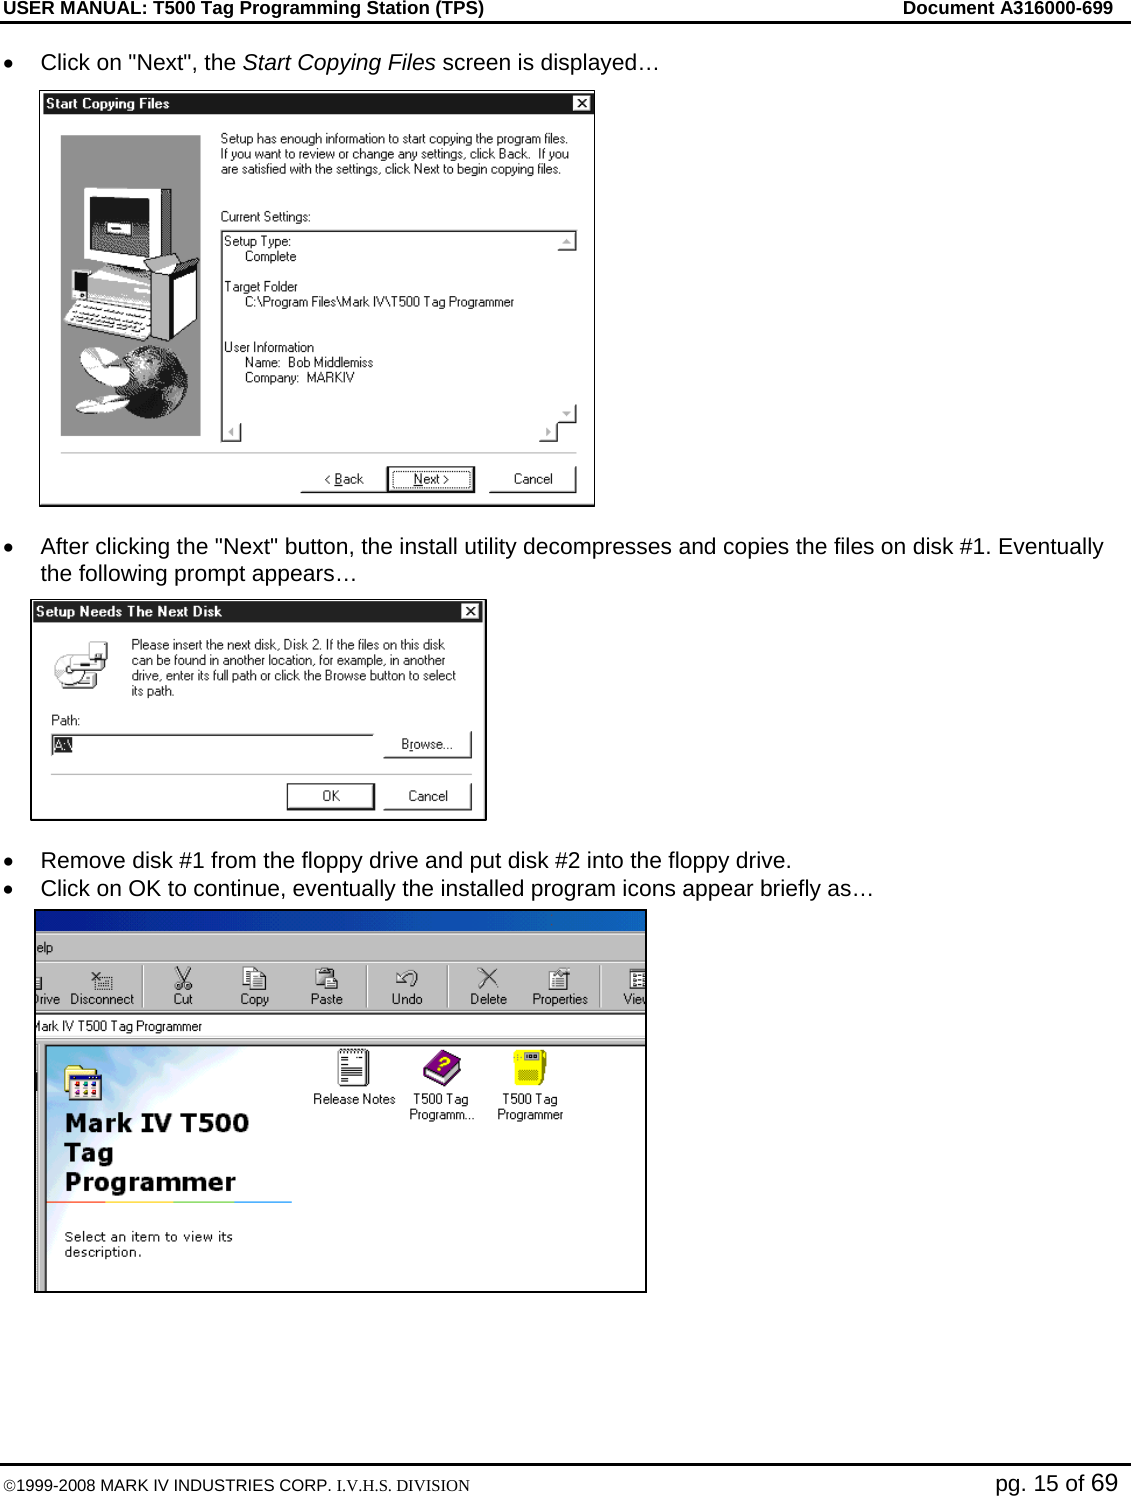 USER MANUAL: T500 Tag Programming Station (TPS)     Document A316000-699  ©1999-2008 MARK IV INDUSTRIES CORP. I.V.H.S. DIVISION   pg. 15 of 69 •  Click on &quot;Next&quot;, the Start Copying Files screen is displayed…  •  After clicking the &quot;Next&quot; button, the install utility decompresses and copies the files on disk #1. Eventually the following prompt appears…  •  Remove disk #1 from the floppy drive and put disk #2 into the floppy drive. •  Click on OK to continue, eventually the installed program icons appear briefly as… 